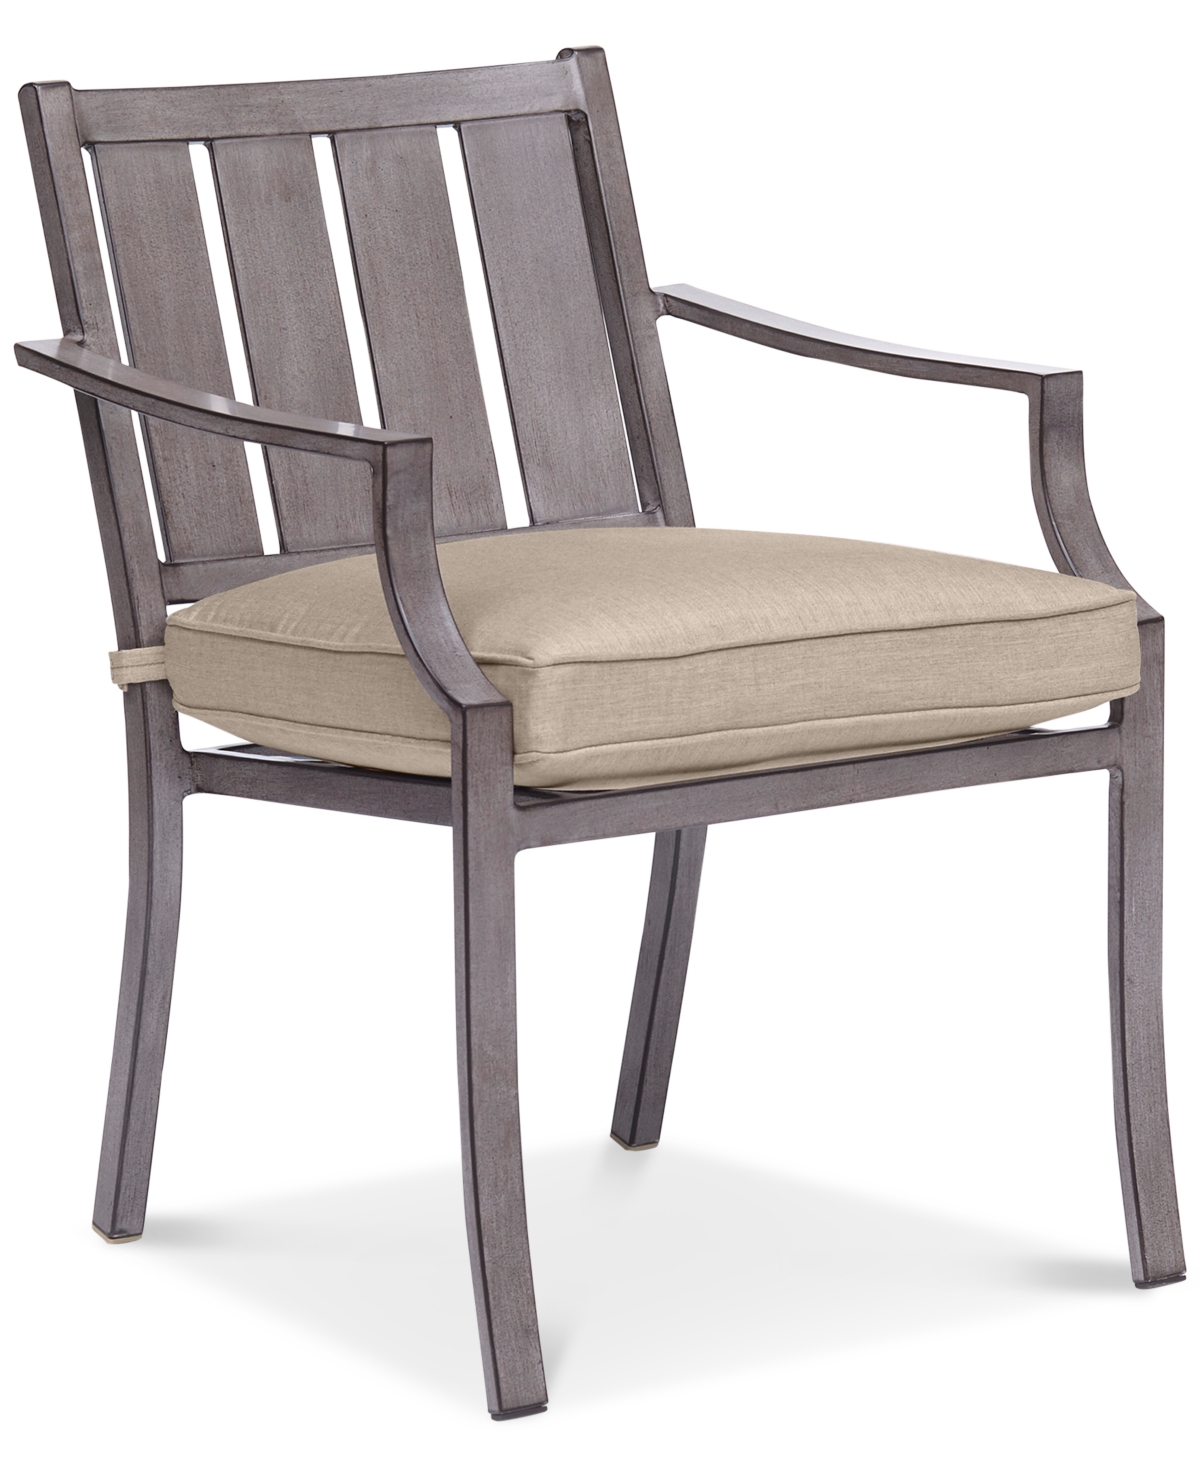 Agio Set Of 6 Wayland Outdoor Dining Chair, Created For Macy's In Outdura Remy Pebble